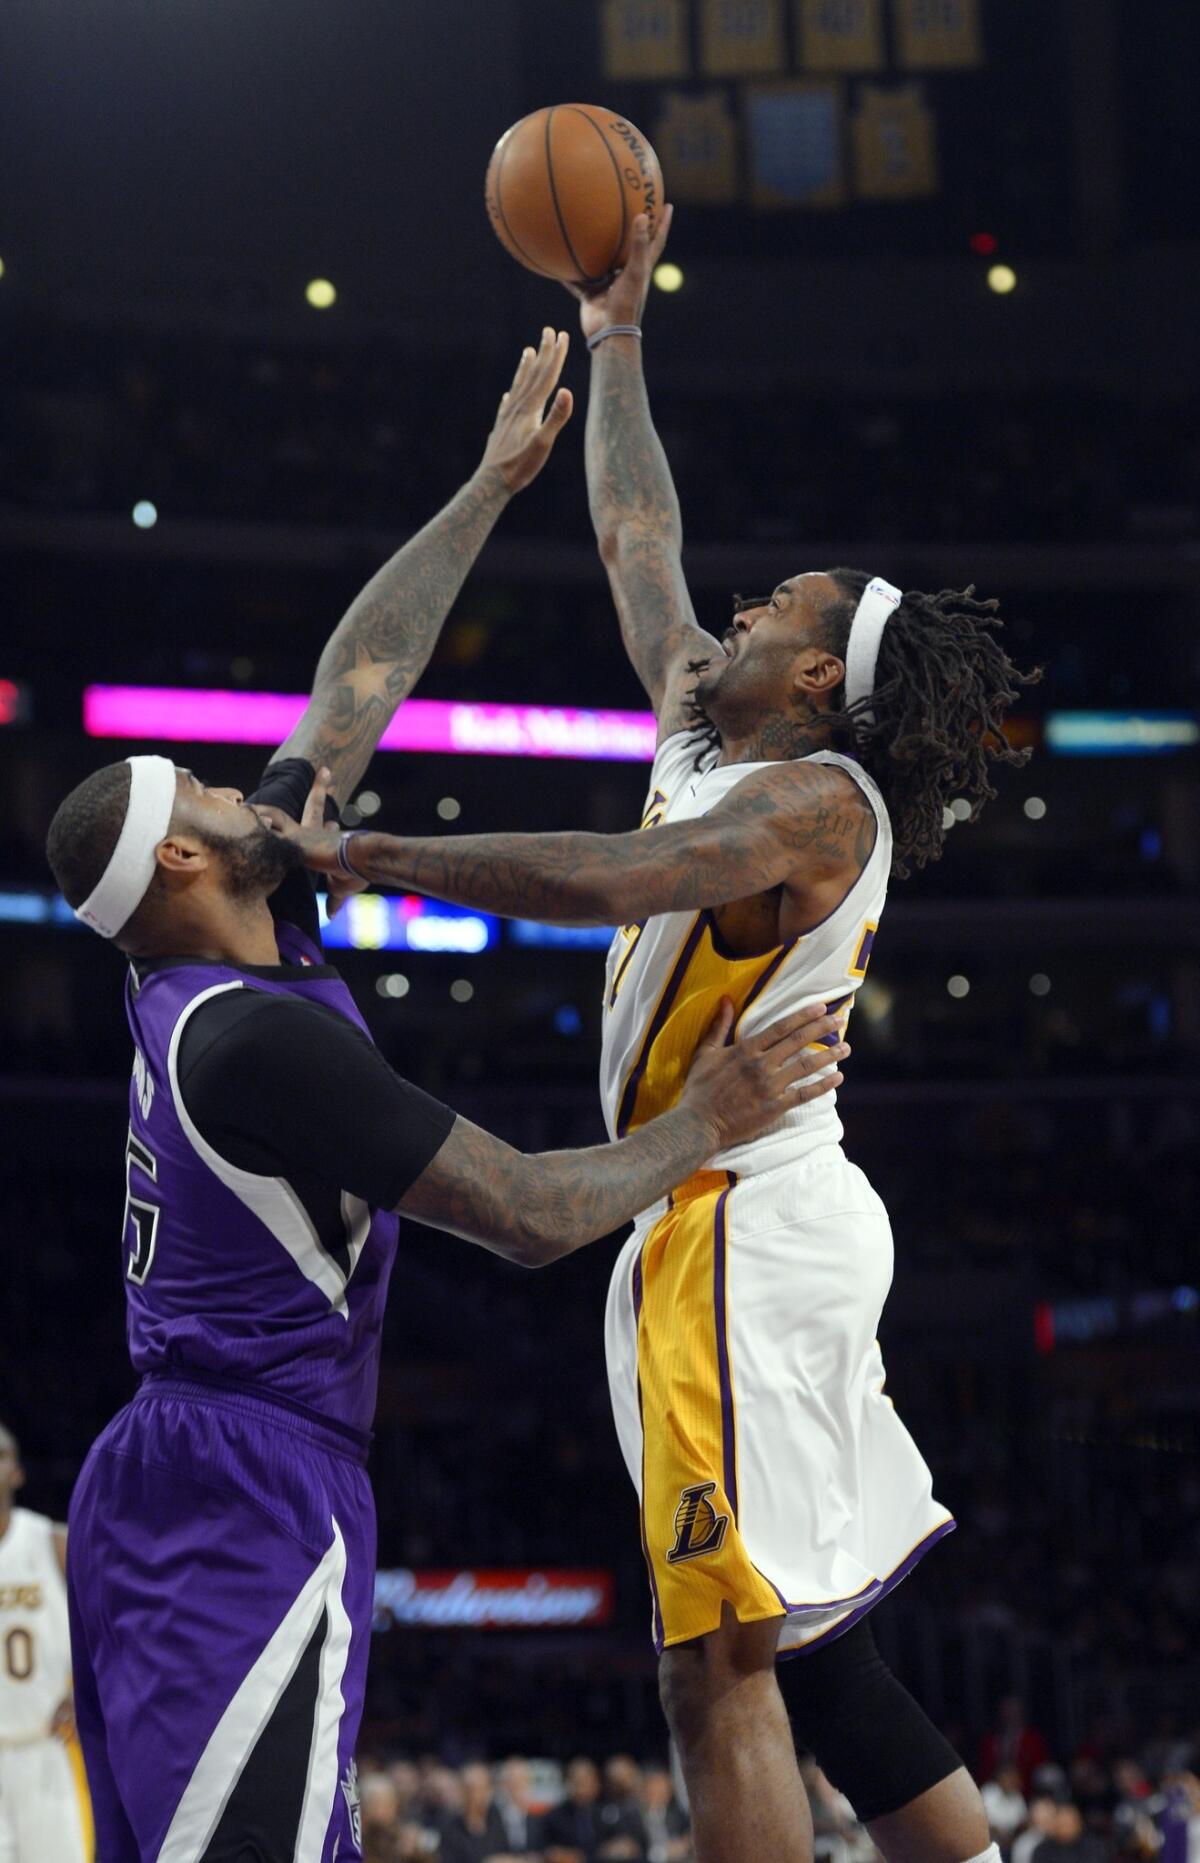 Lakers power forward Jordan Hill elevates for a shot over Kings center DeMarcus Cousins.